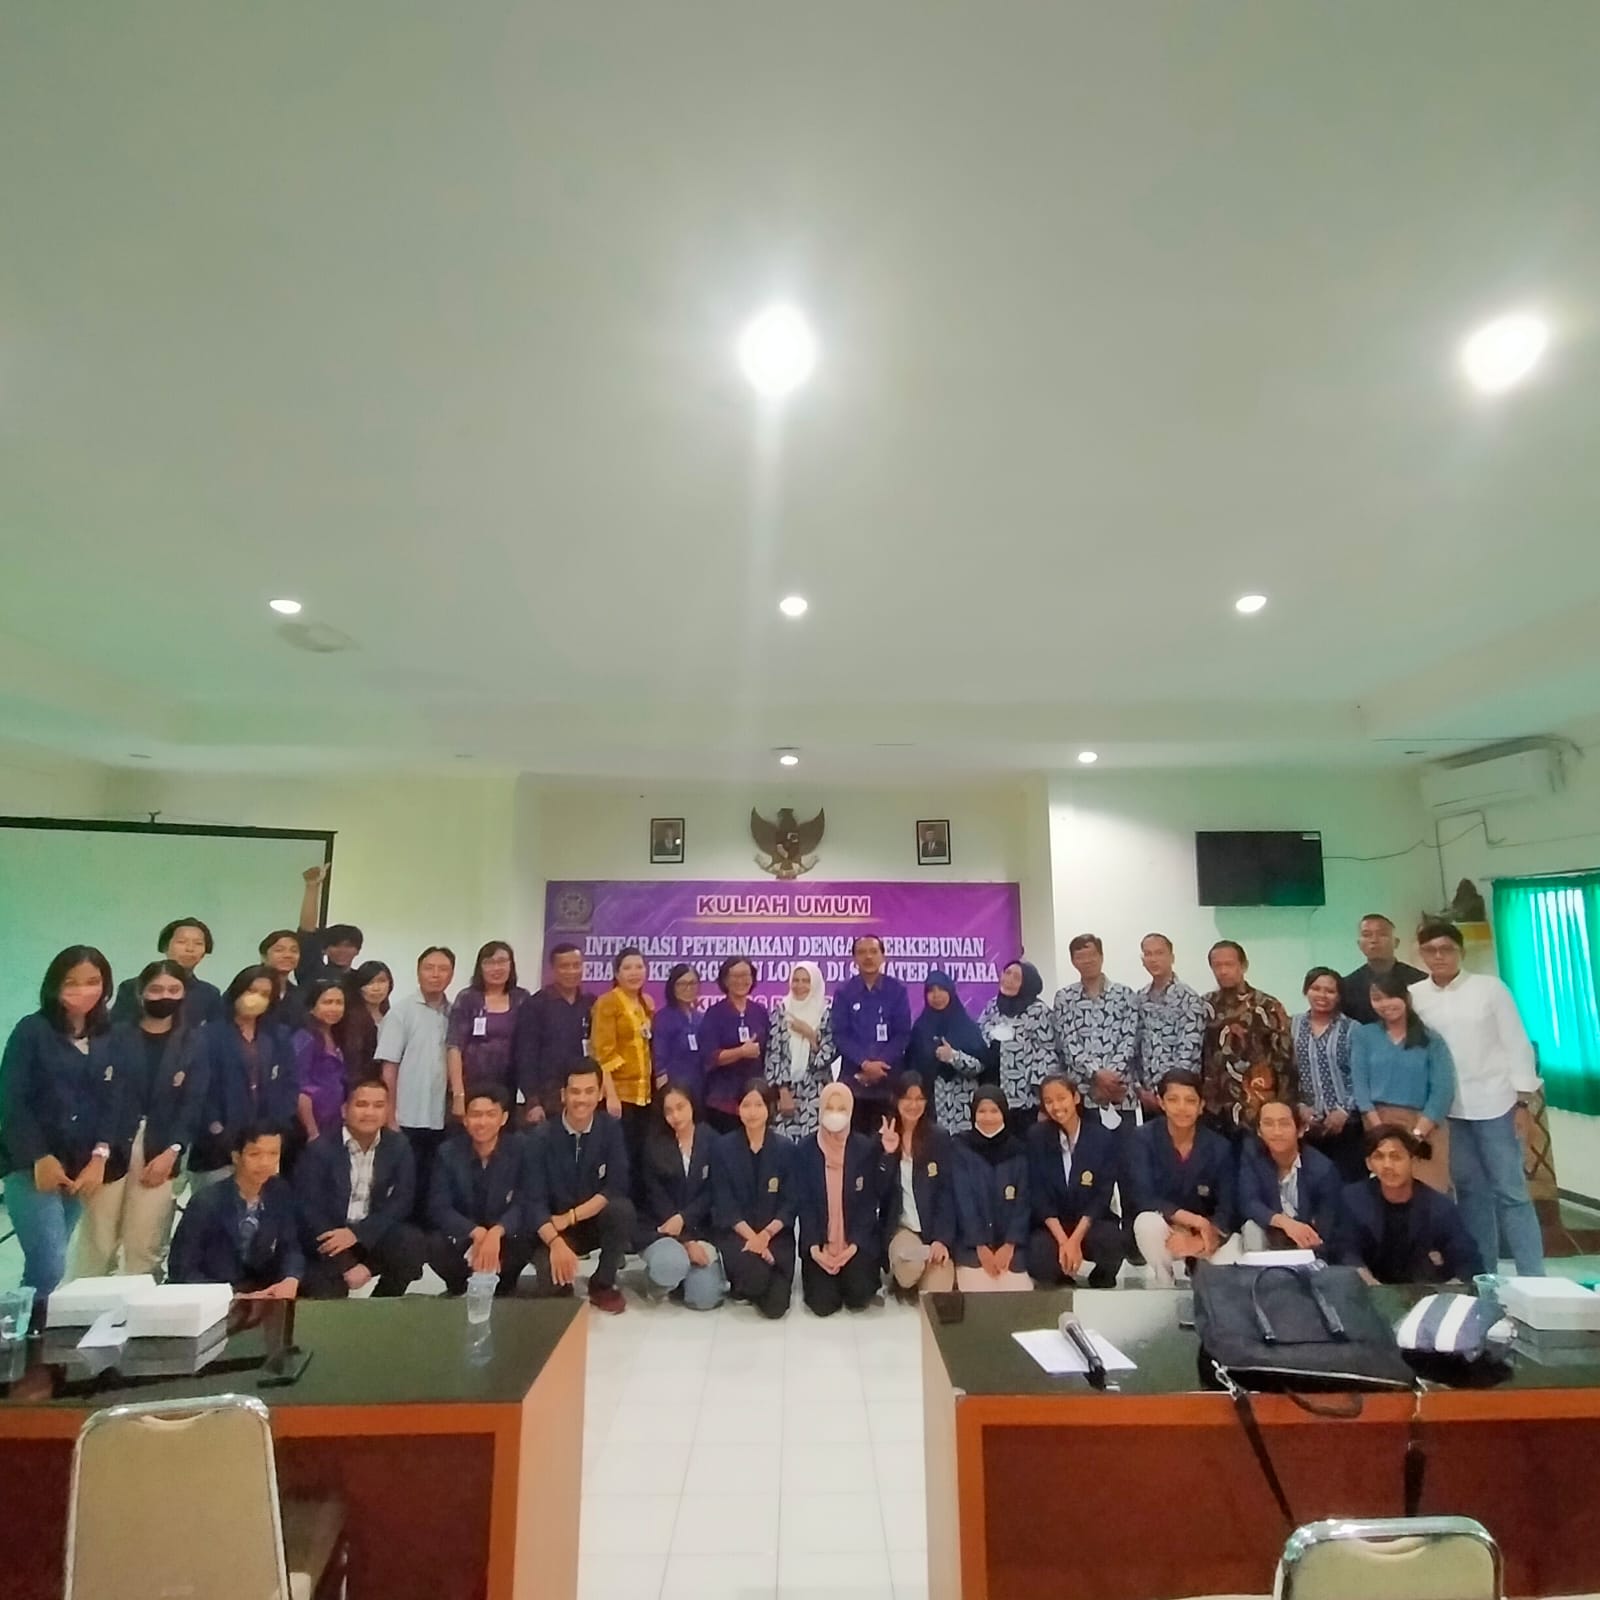 GENERAL LECTURE BECOME BEGINNING OF COOPERATION BETWEEN THE FACULTY OF ANIMAL HUSBANDRY OF UDAYANA UNIVERSITY AND THE FACULTY OF AGRICULTURE, UNIVERSITY OF NORTH SUMATERA